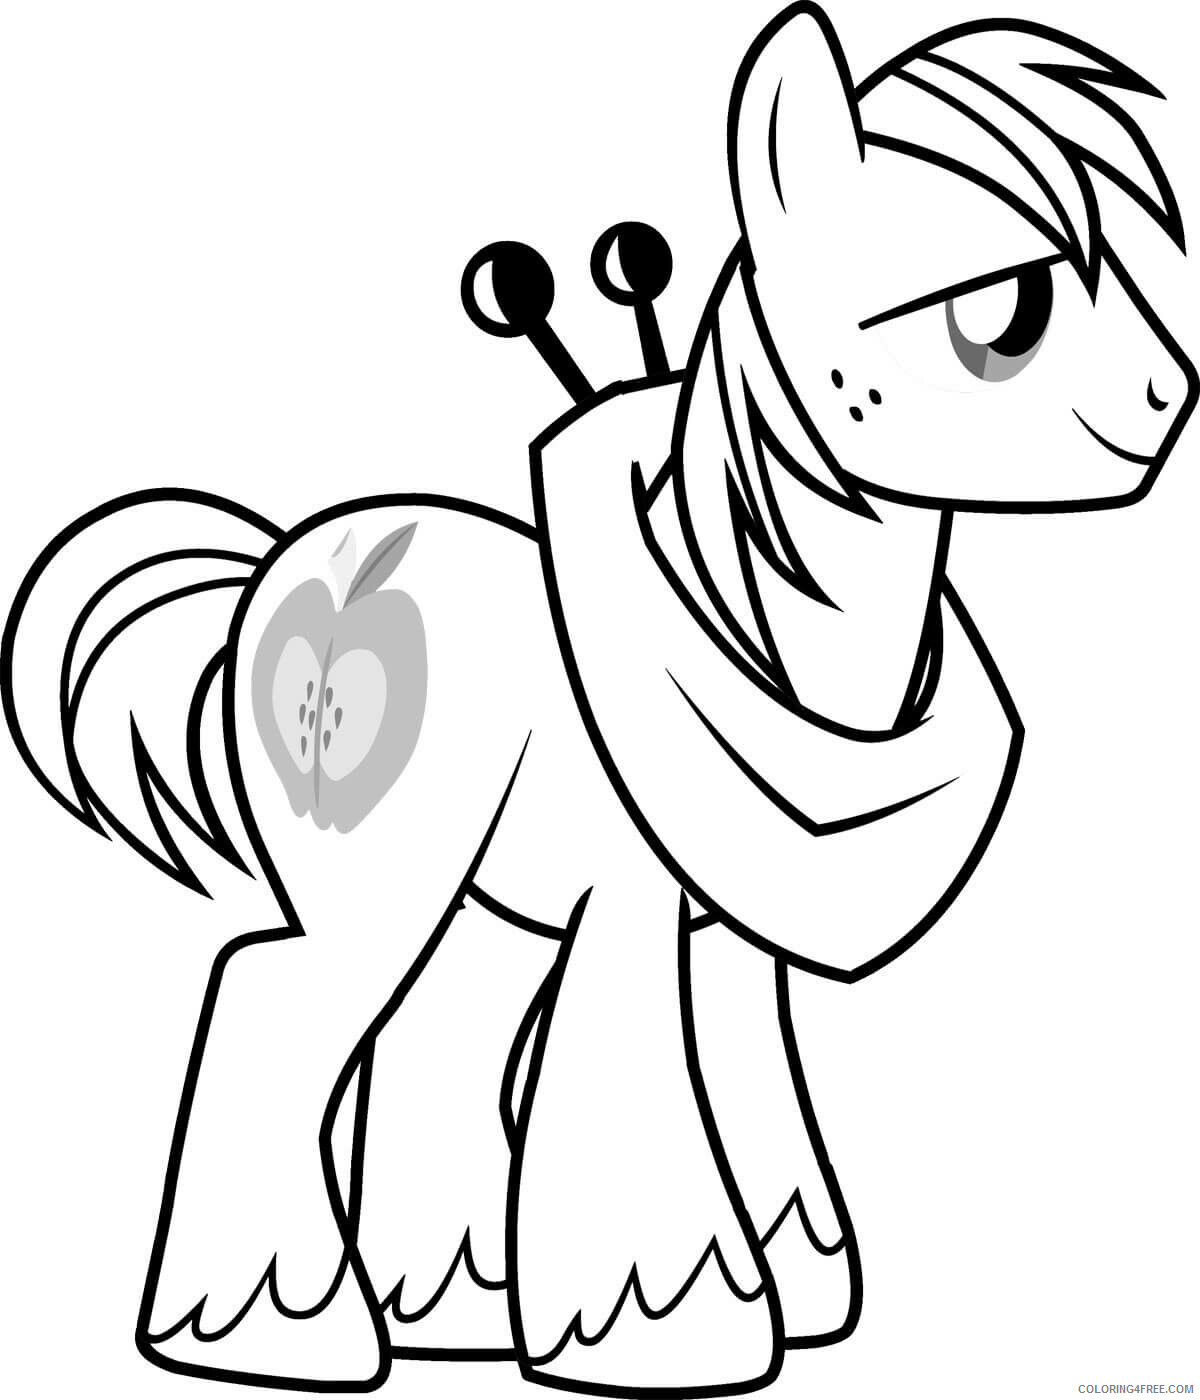 MLP Coloring Pages Color MLP Printable 2021 4135 Coloring4free